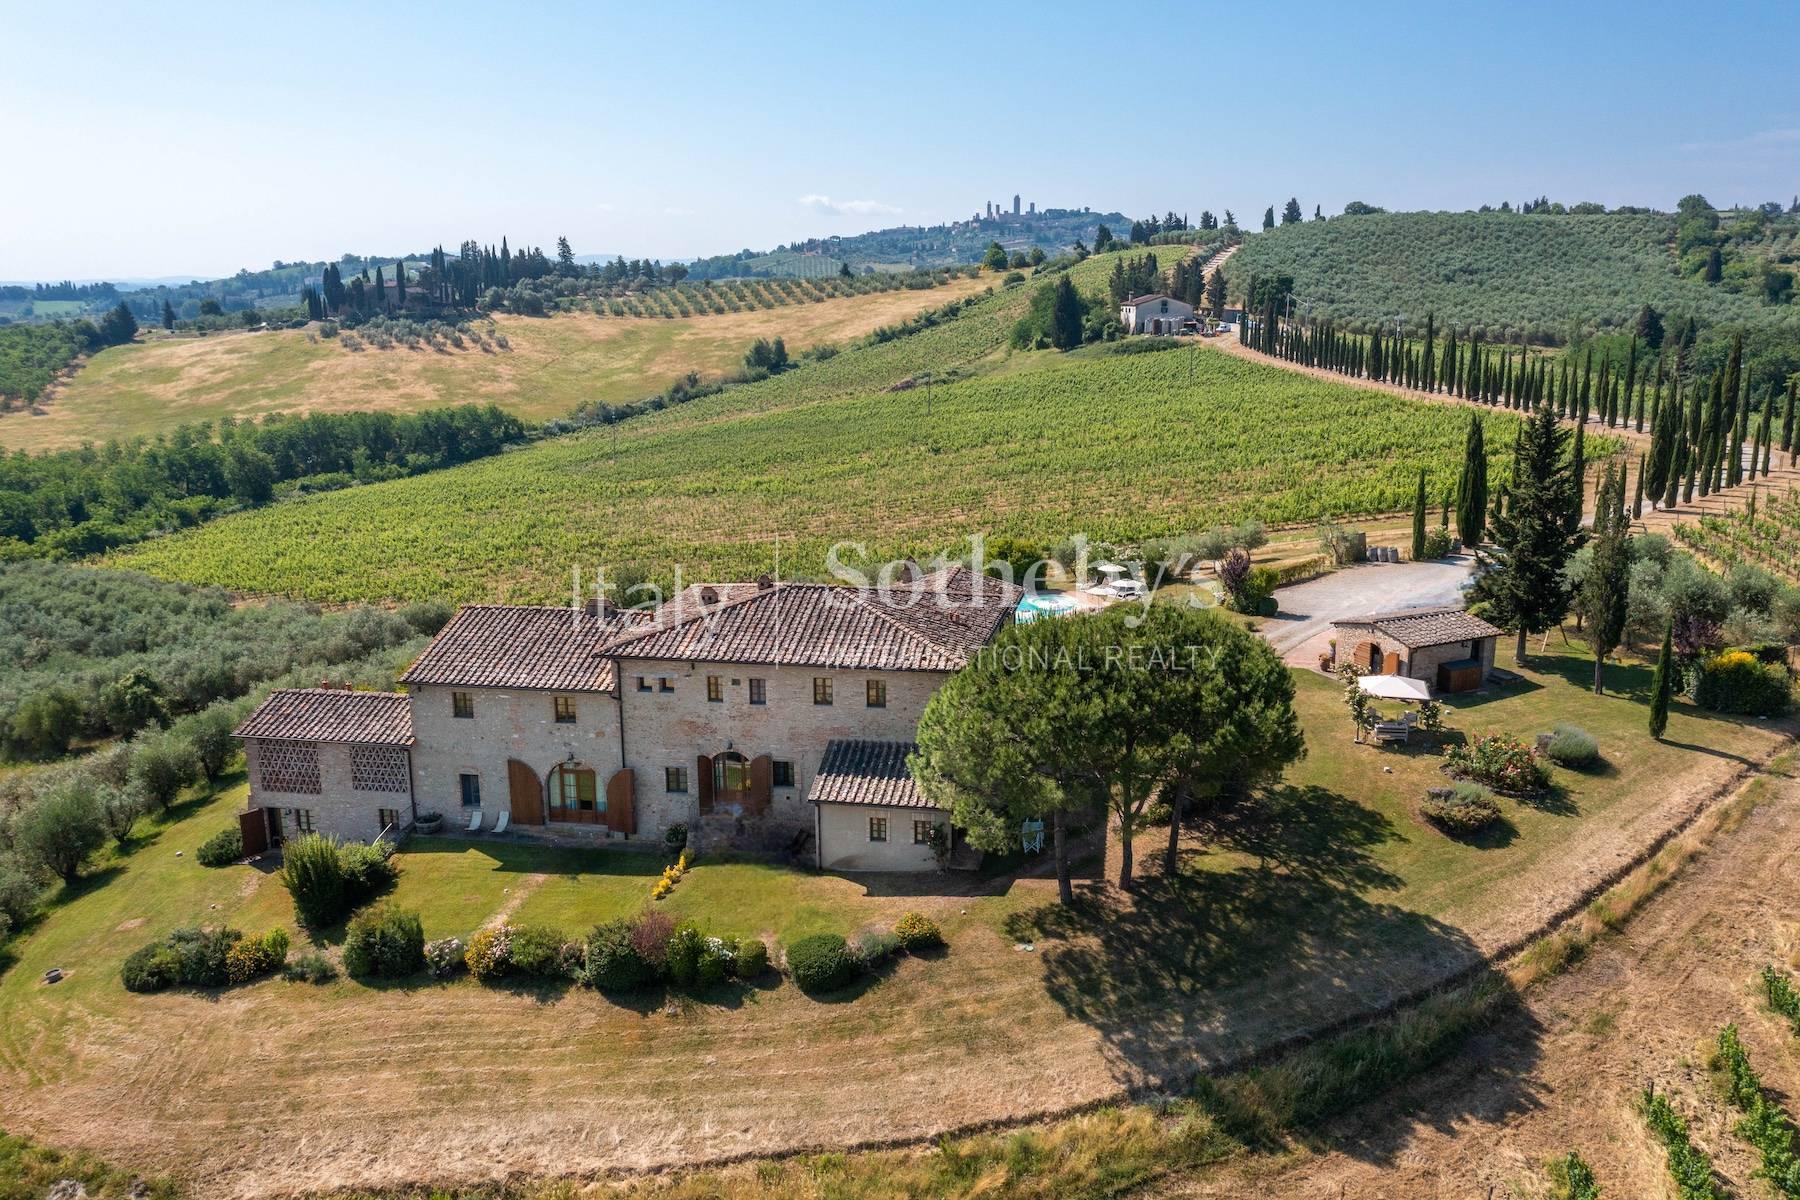 Winery with ancient country house in San gimignano - 33